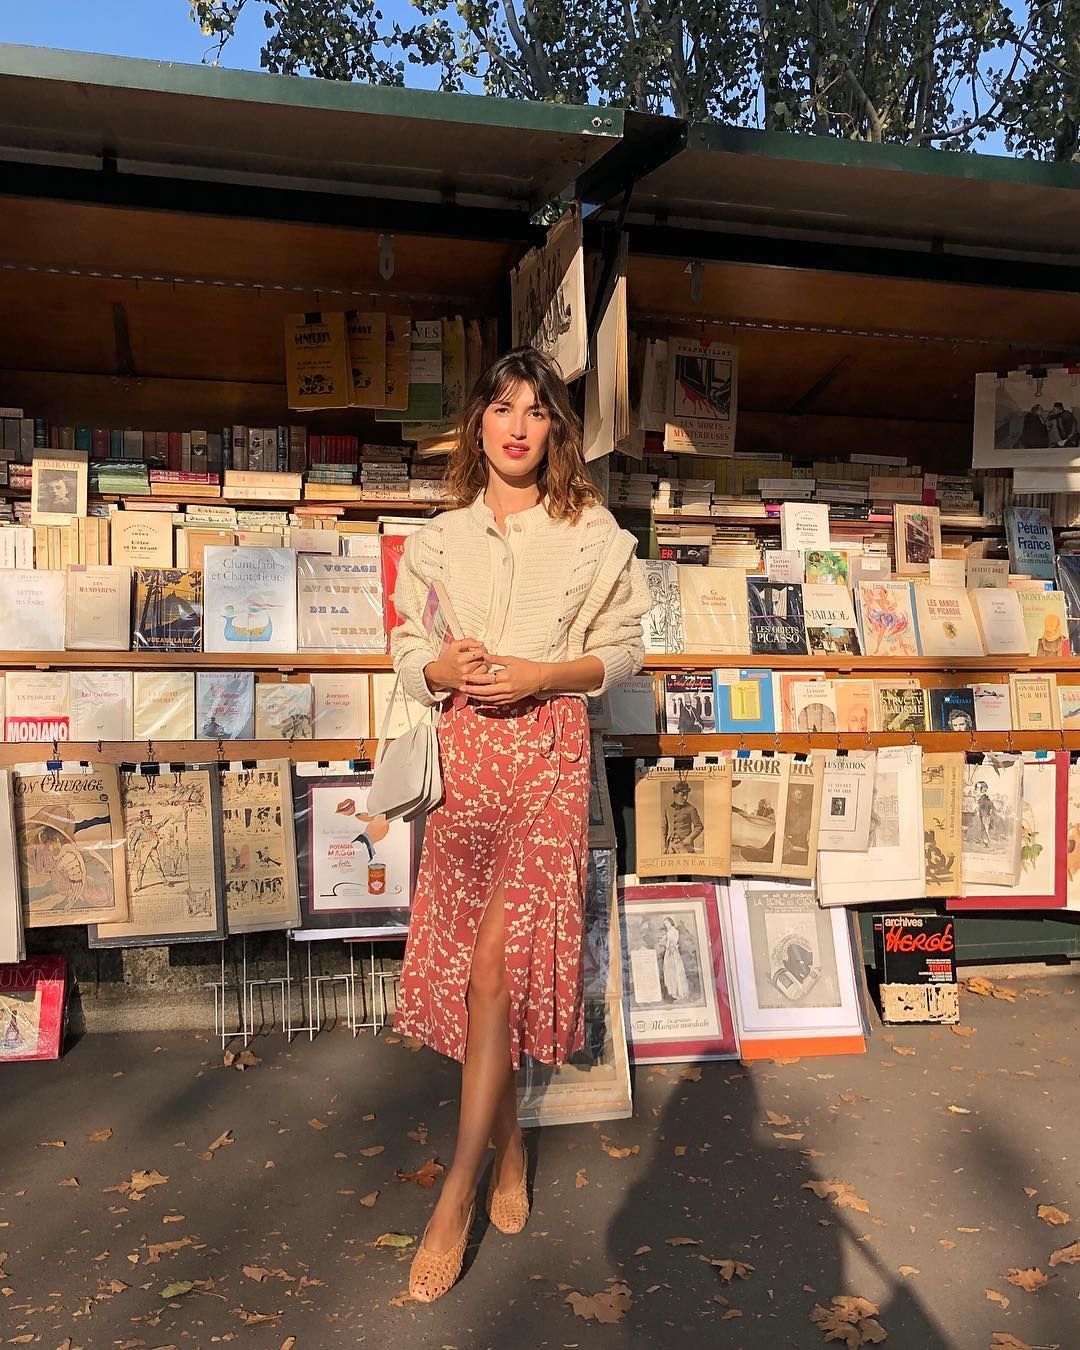 Woman posing in front of books and papers on the street in France